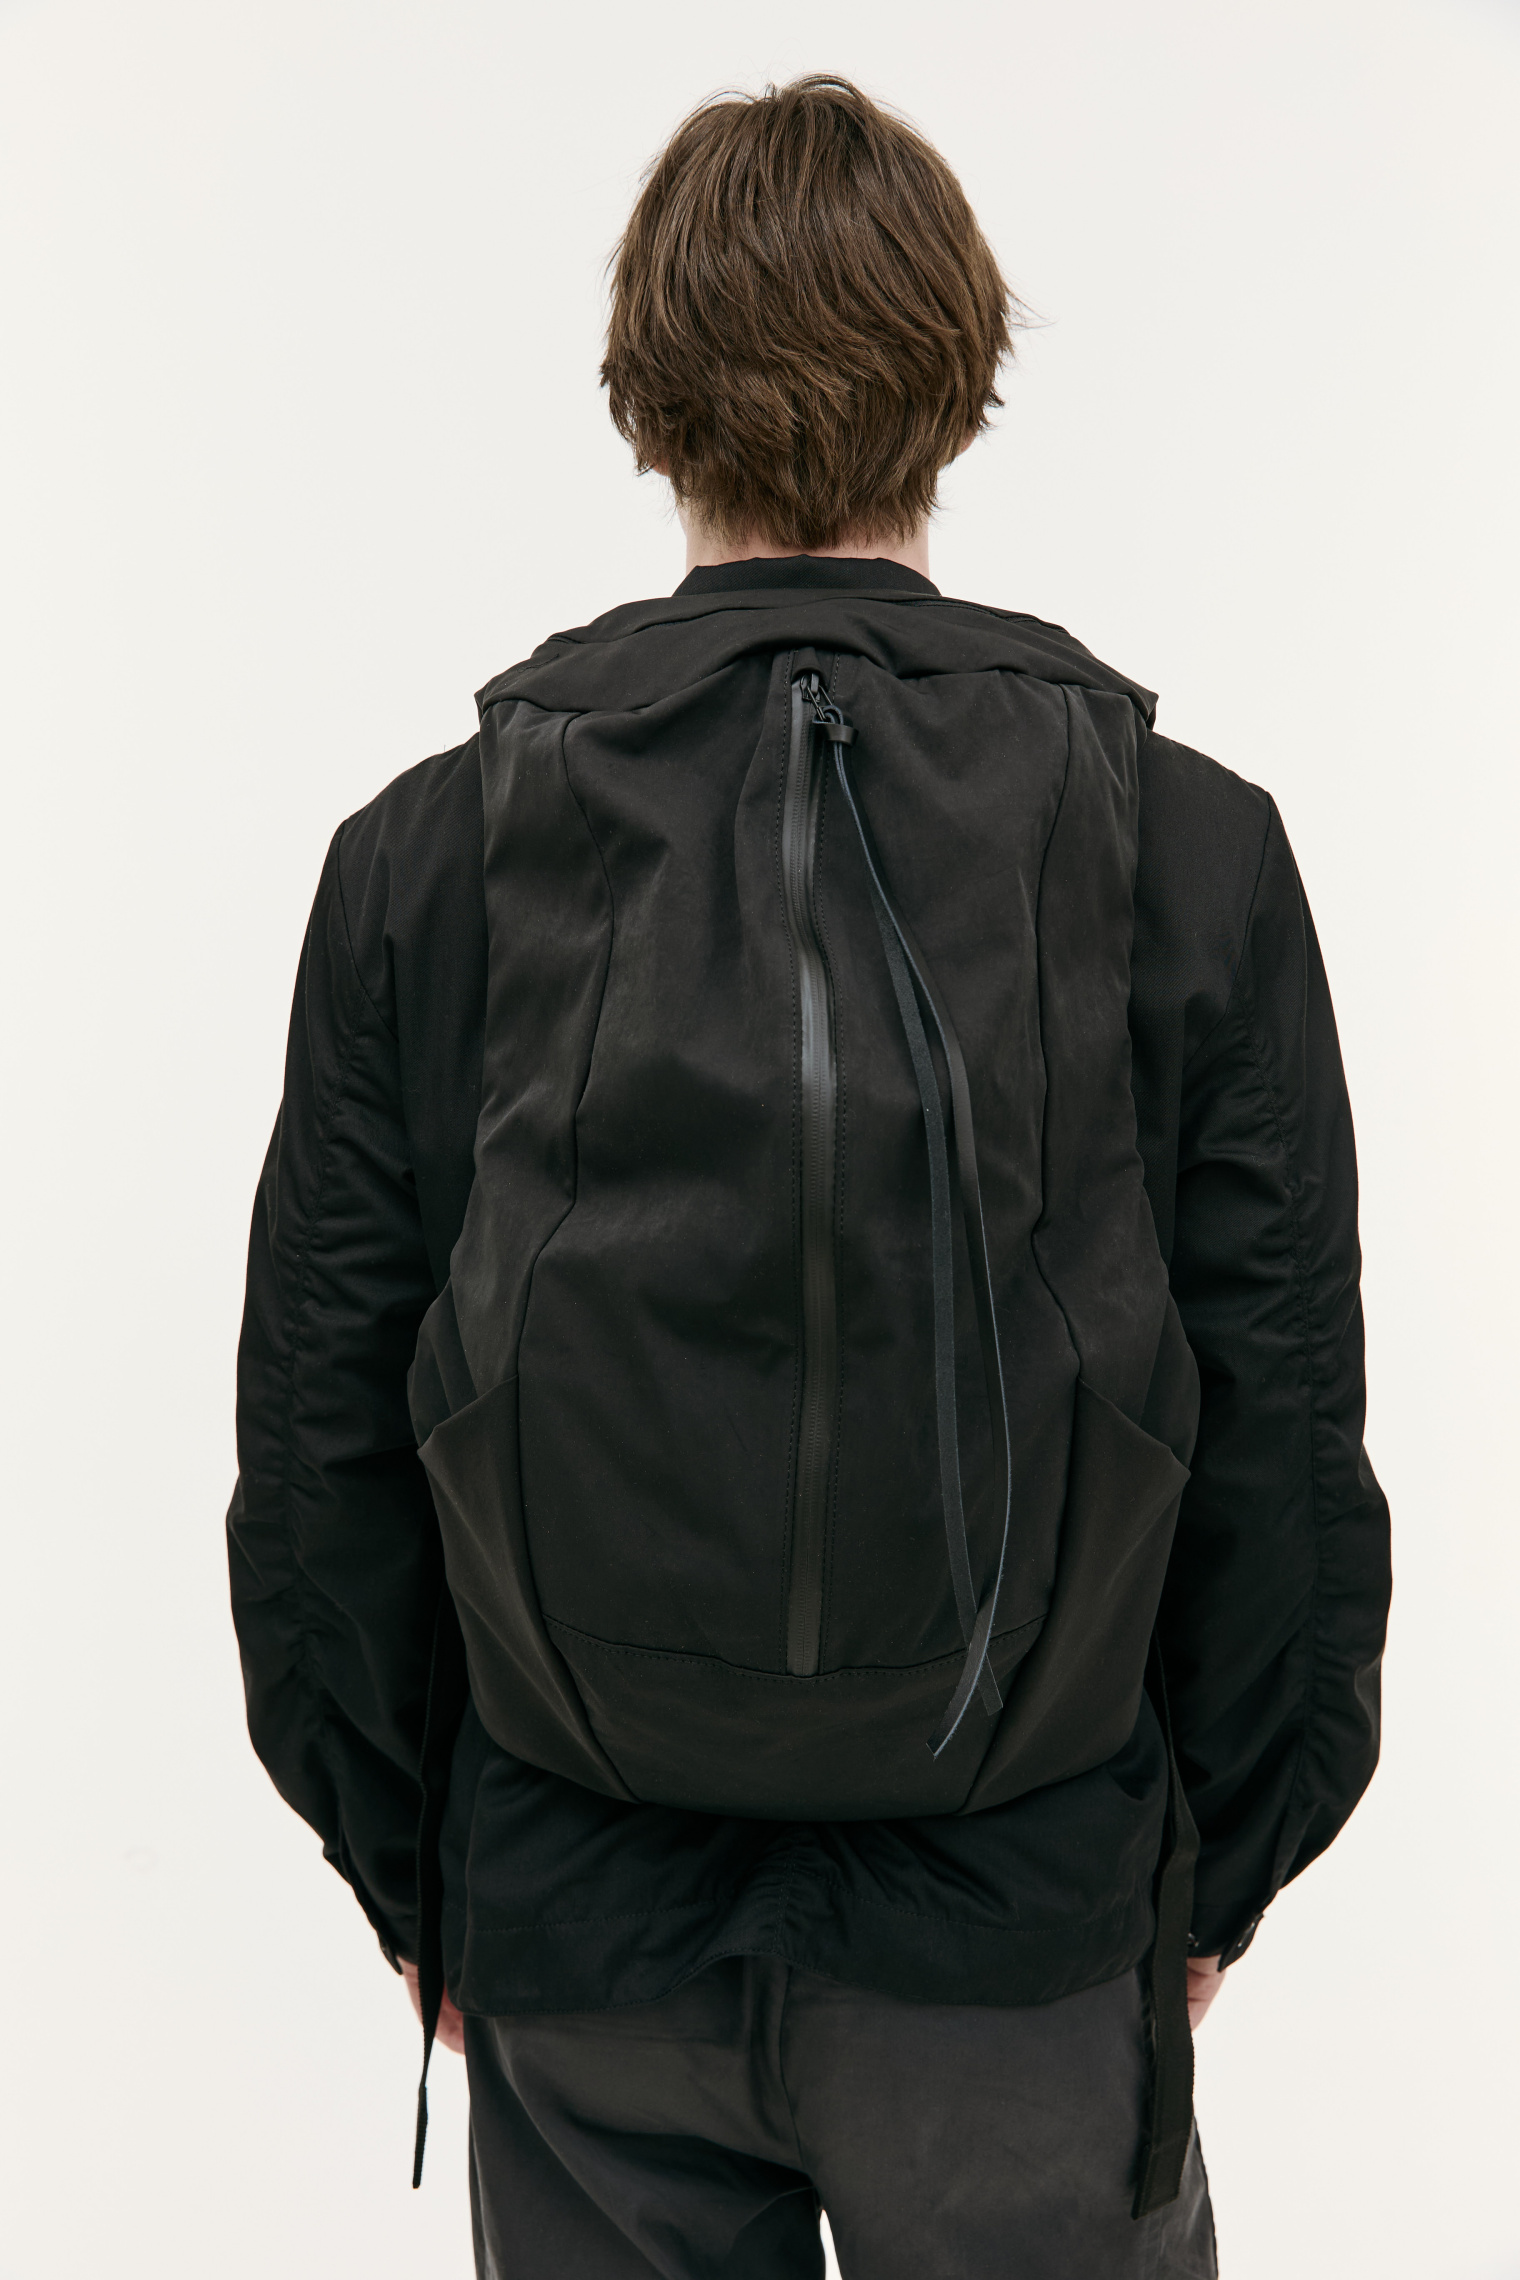 The Viridi-Anne Water-repellent backpack